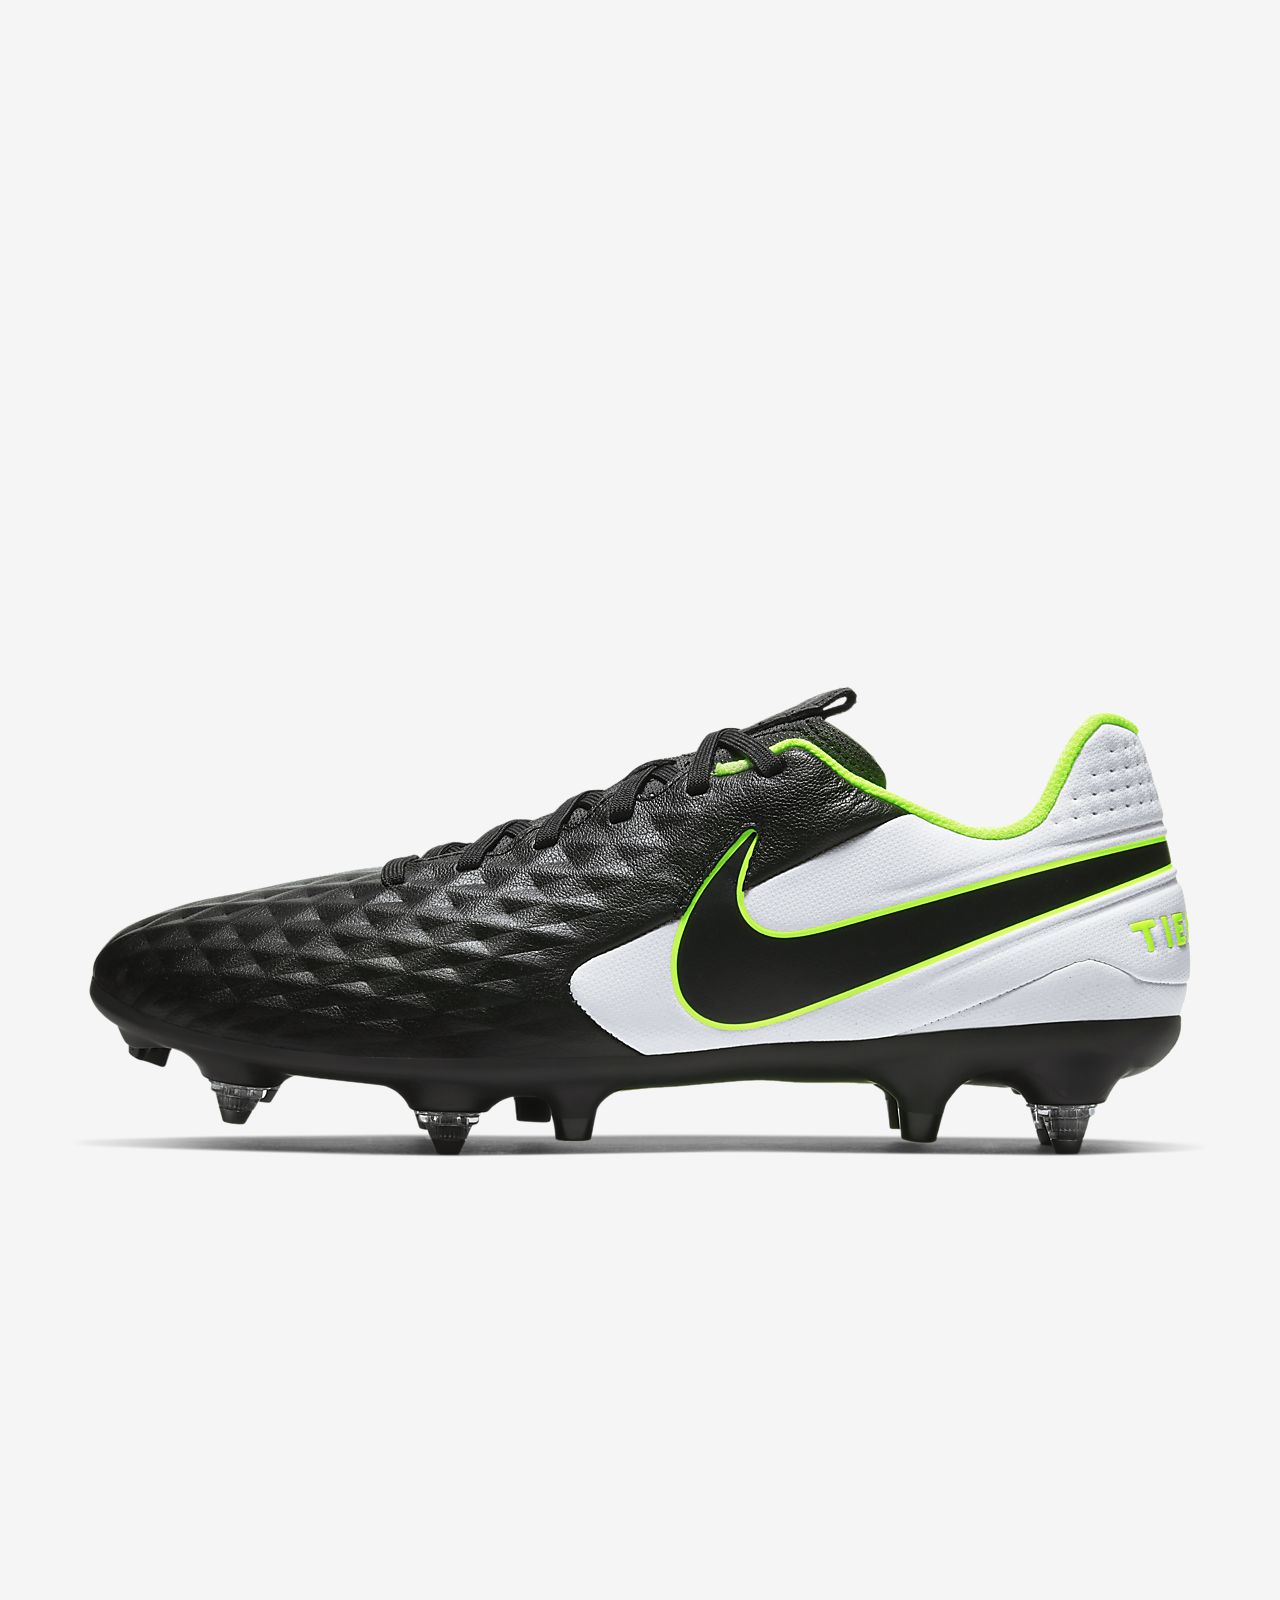 Soccer.com Nike Tiempo Legend 8 Play Test and Review On.